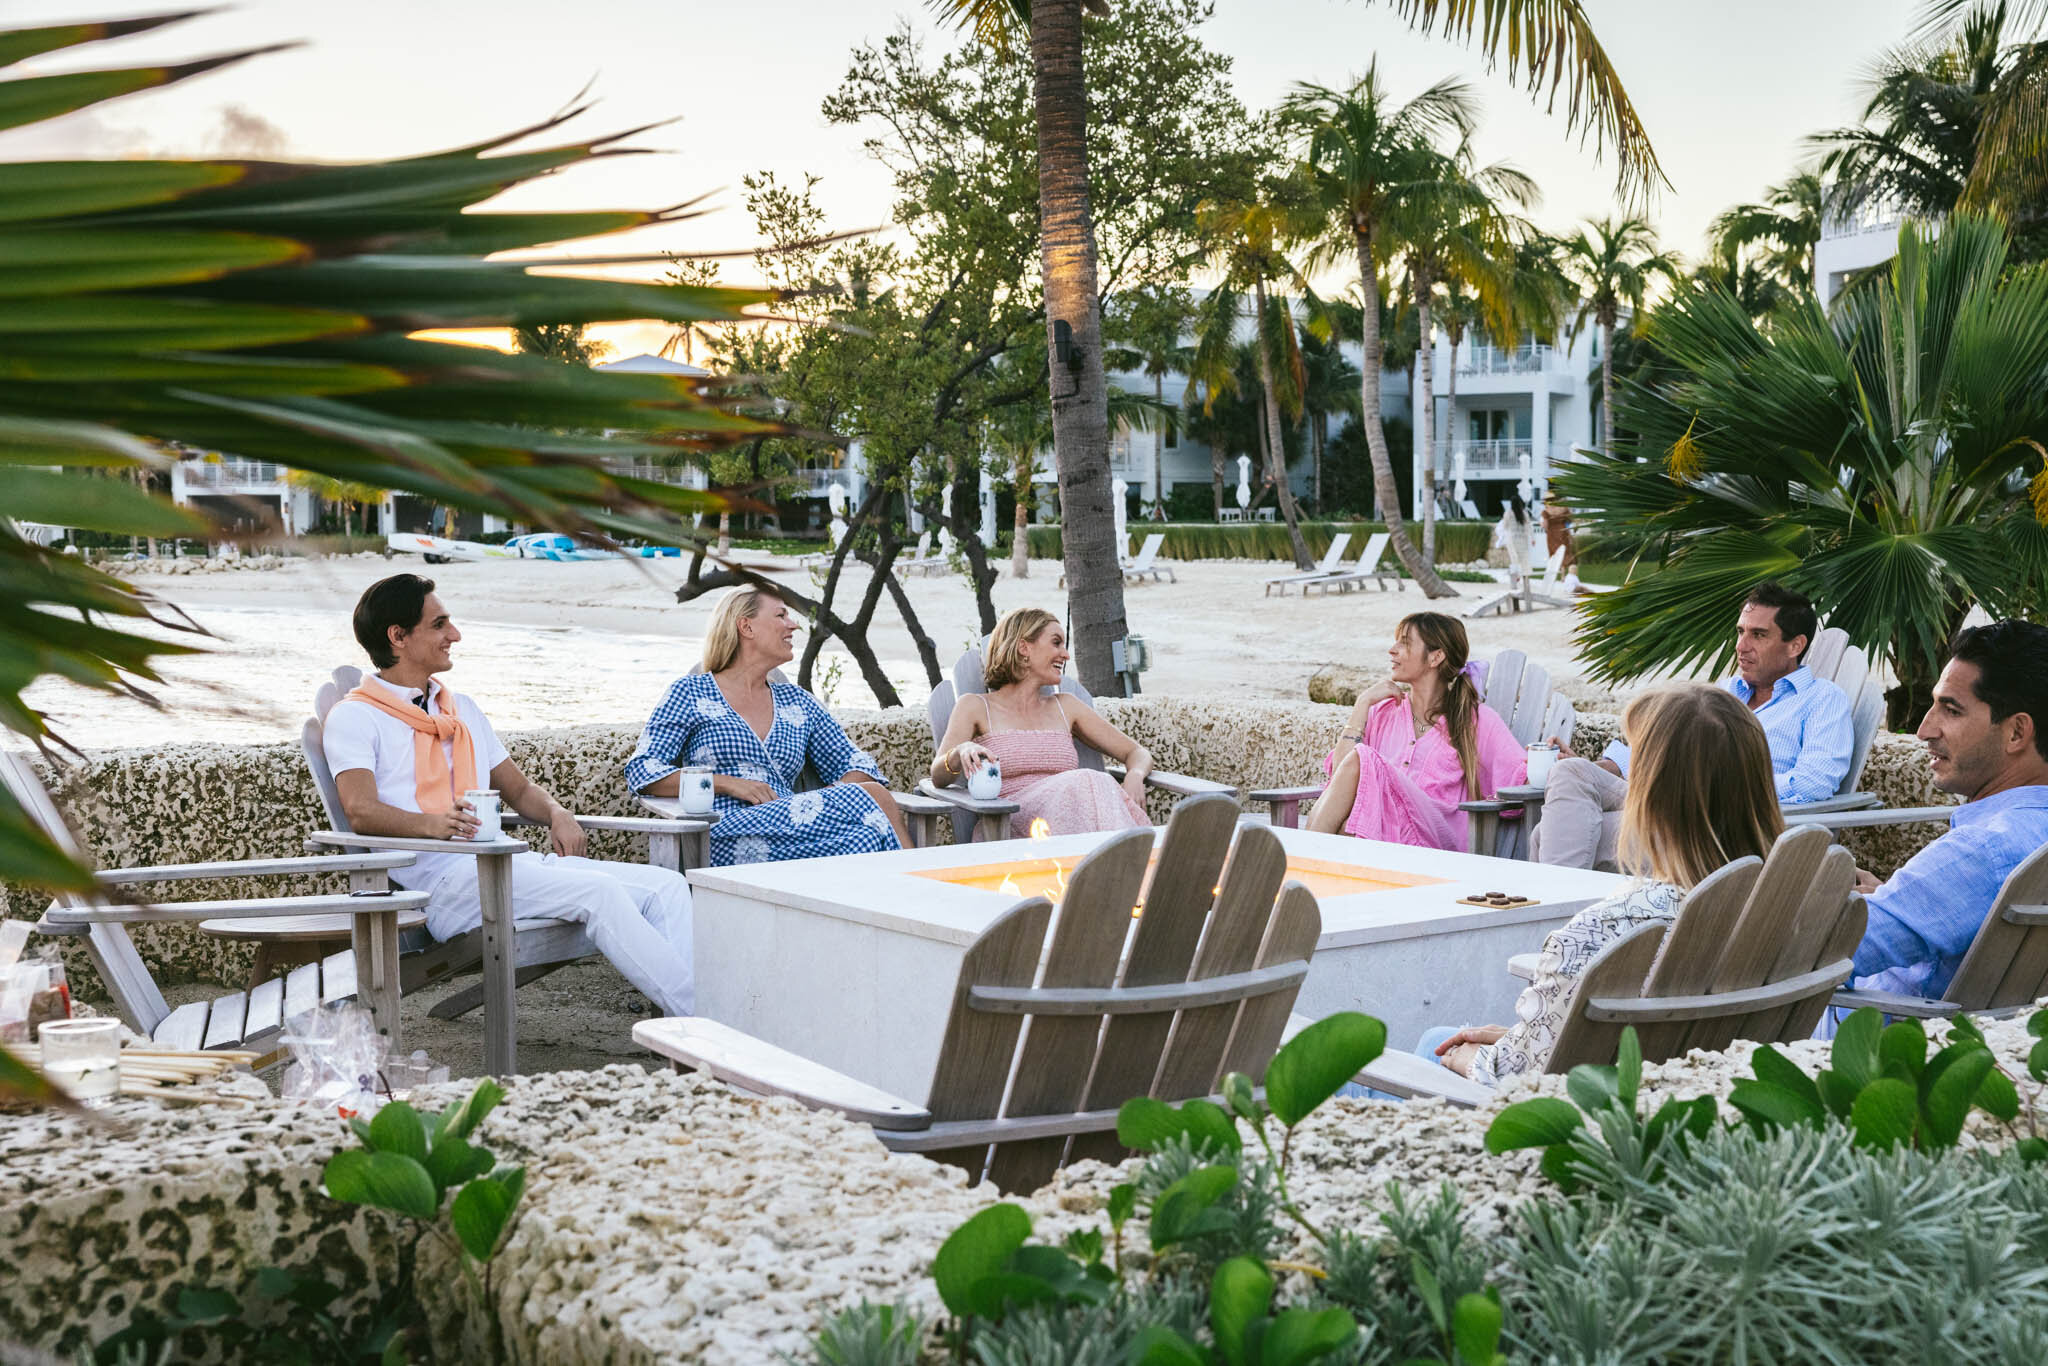  Couples Gathered In Chairs Relax Around A Lit Fire Pit At Dusk On The Islands Of Islamorada’s Private Beach. 